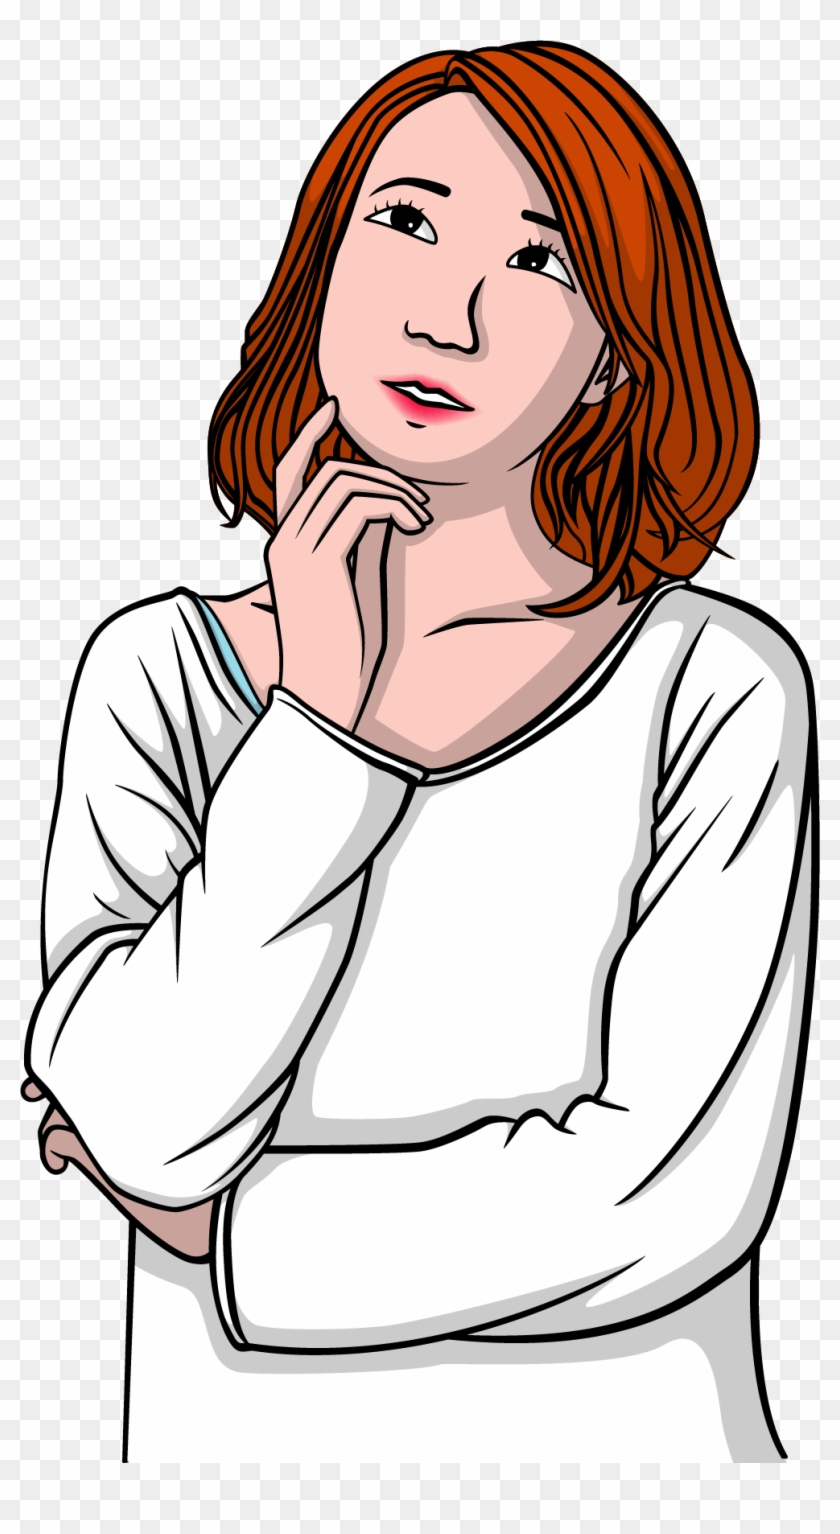 Woman Thought Girl Clip Art - Lady Thinking Clip Art - Png Download #3611489